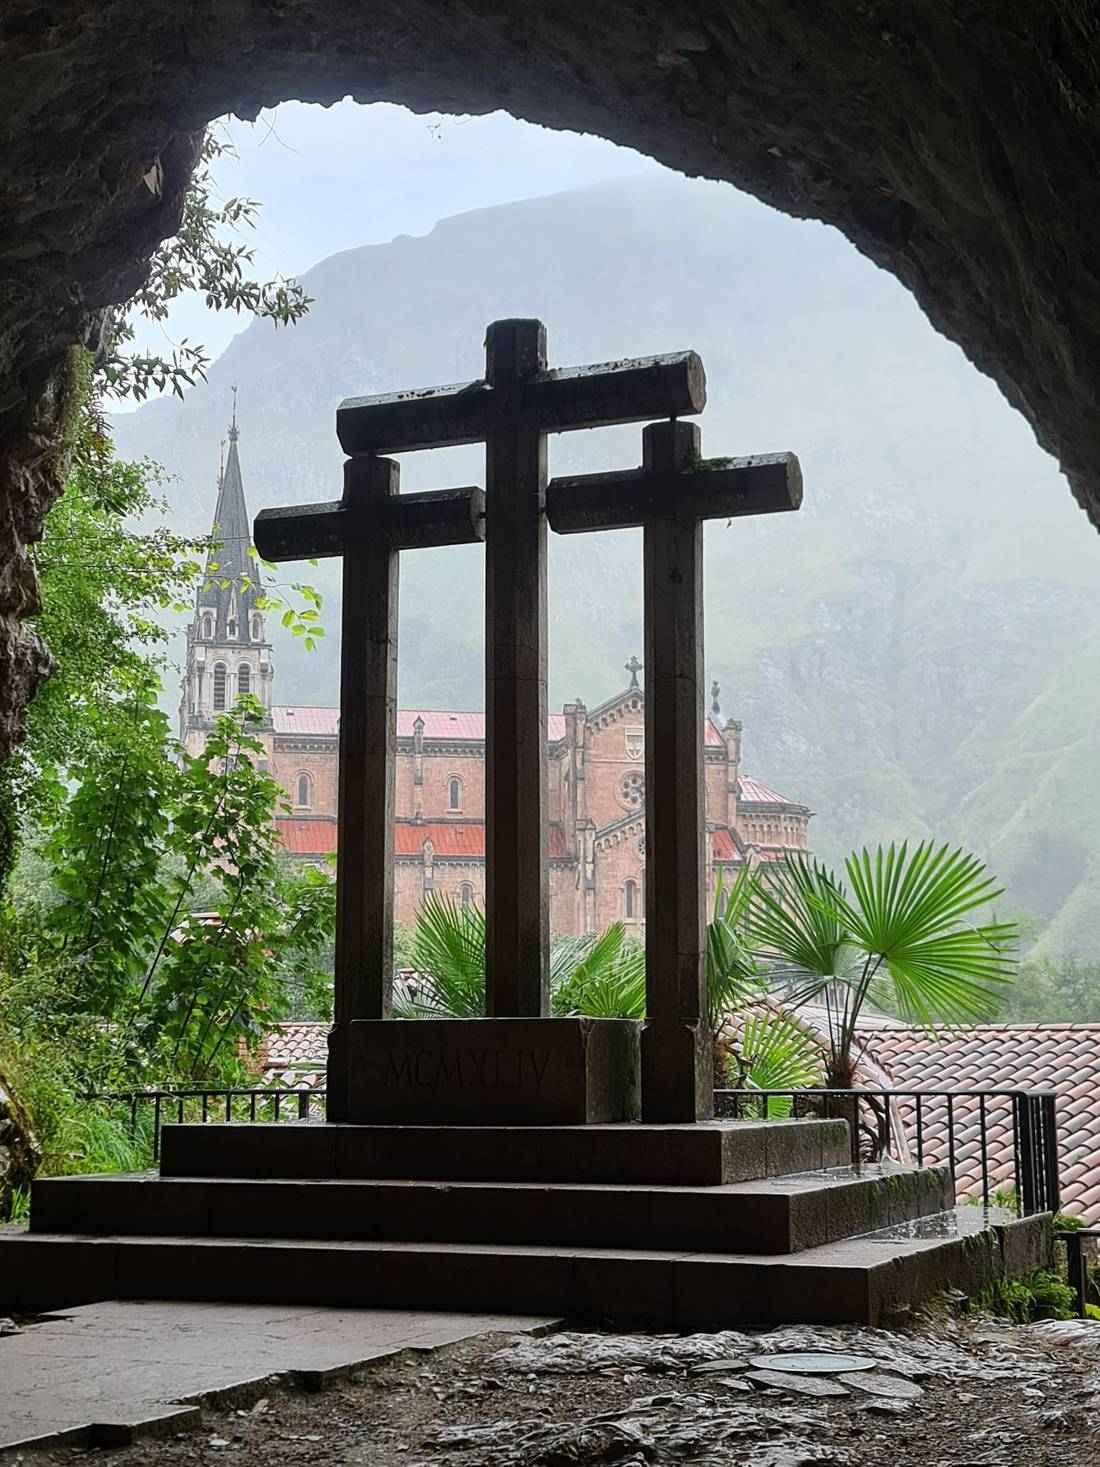 Three stone crosses, inside the Cave Sanctuary of Covadonga. At the bottom of the image we see the Basilica of Santa María la Real de Covadonga, from the side.